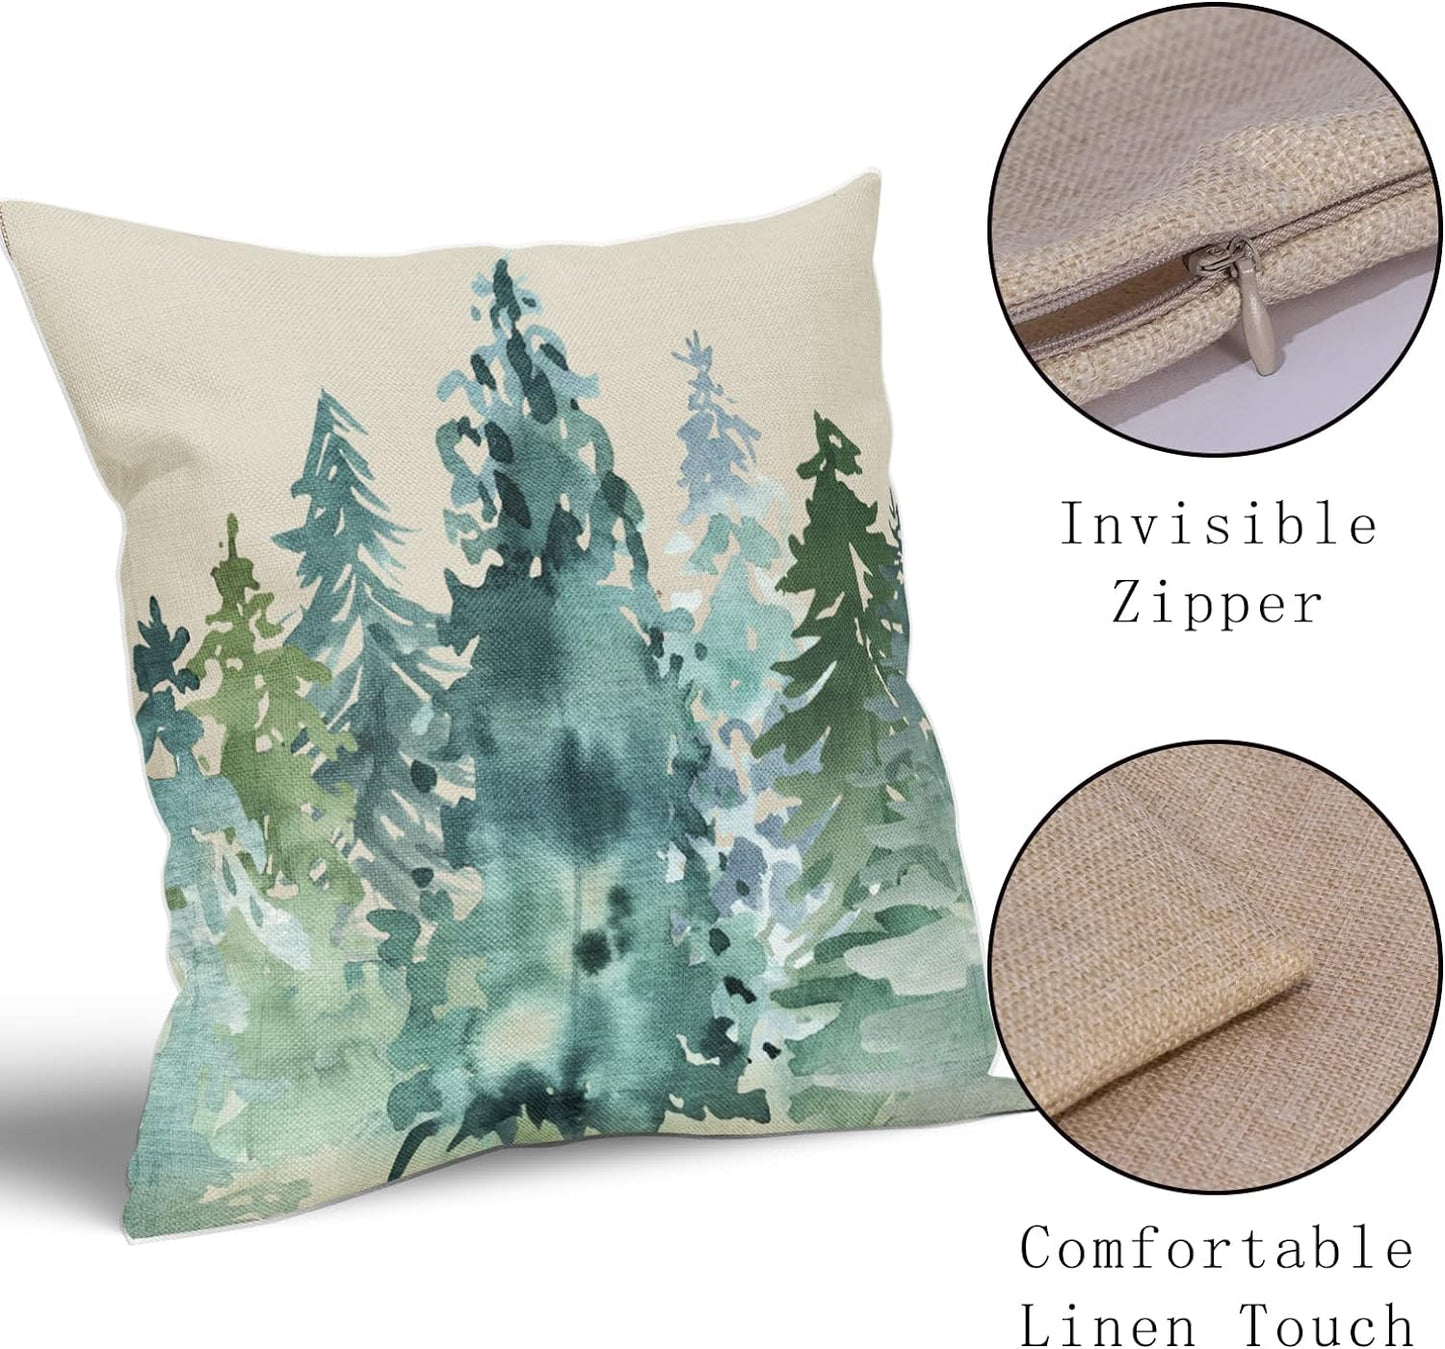 Homedevot Watercolor Blue Green Tree Pillow Covers 18x18 Set of 2 Rustic Style Nature Forest Print Decorative Throw Pillows Winter Christmas Square Linen Cushion Case for Home Sofa Couch Bed Outdoor